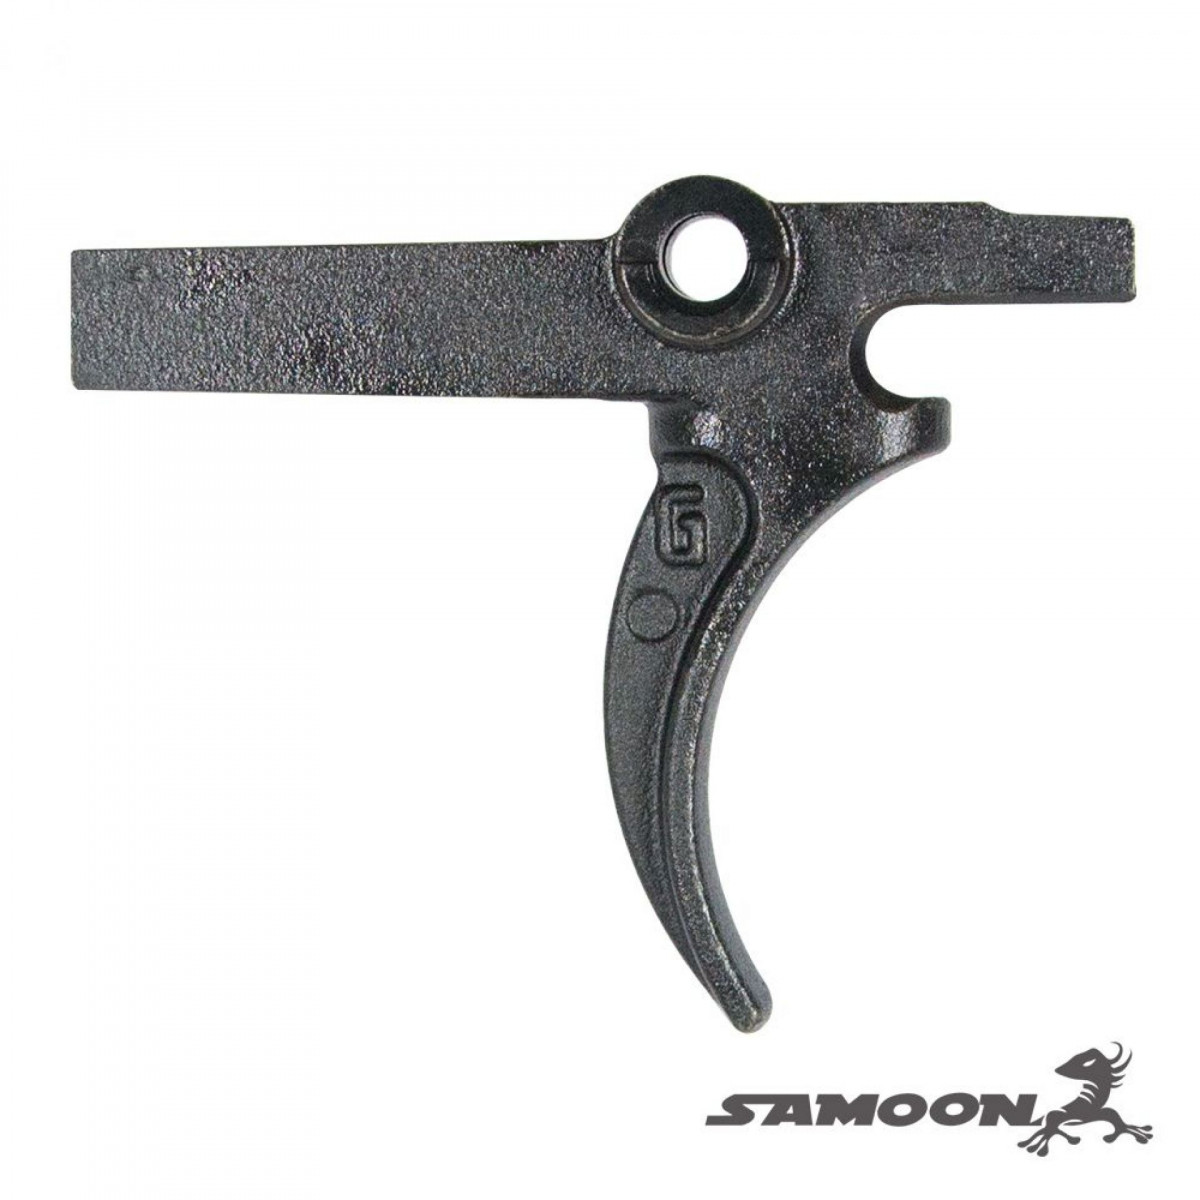 G Style Curved Steel Trigger For GHK AR Series